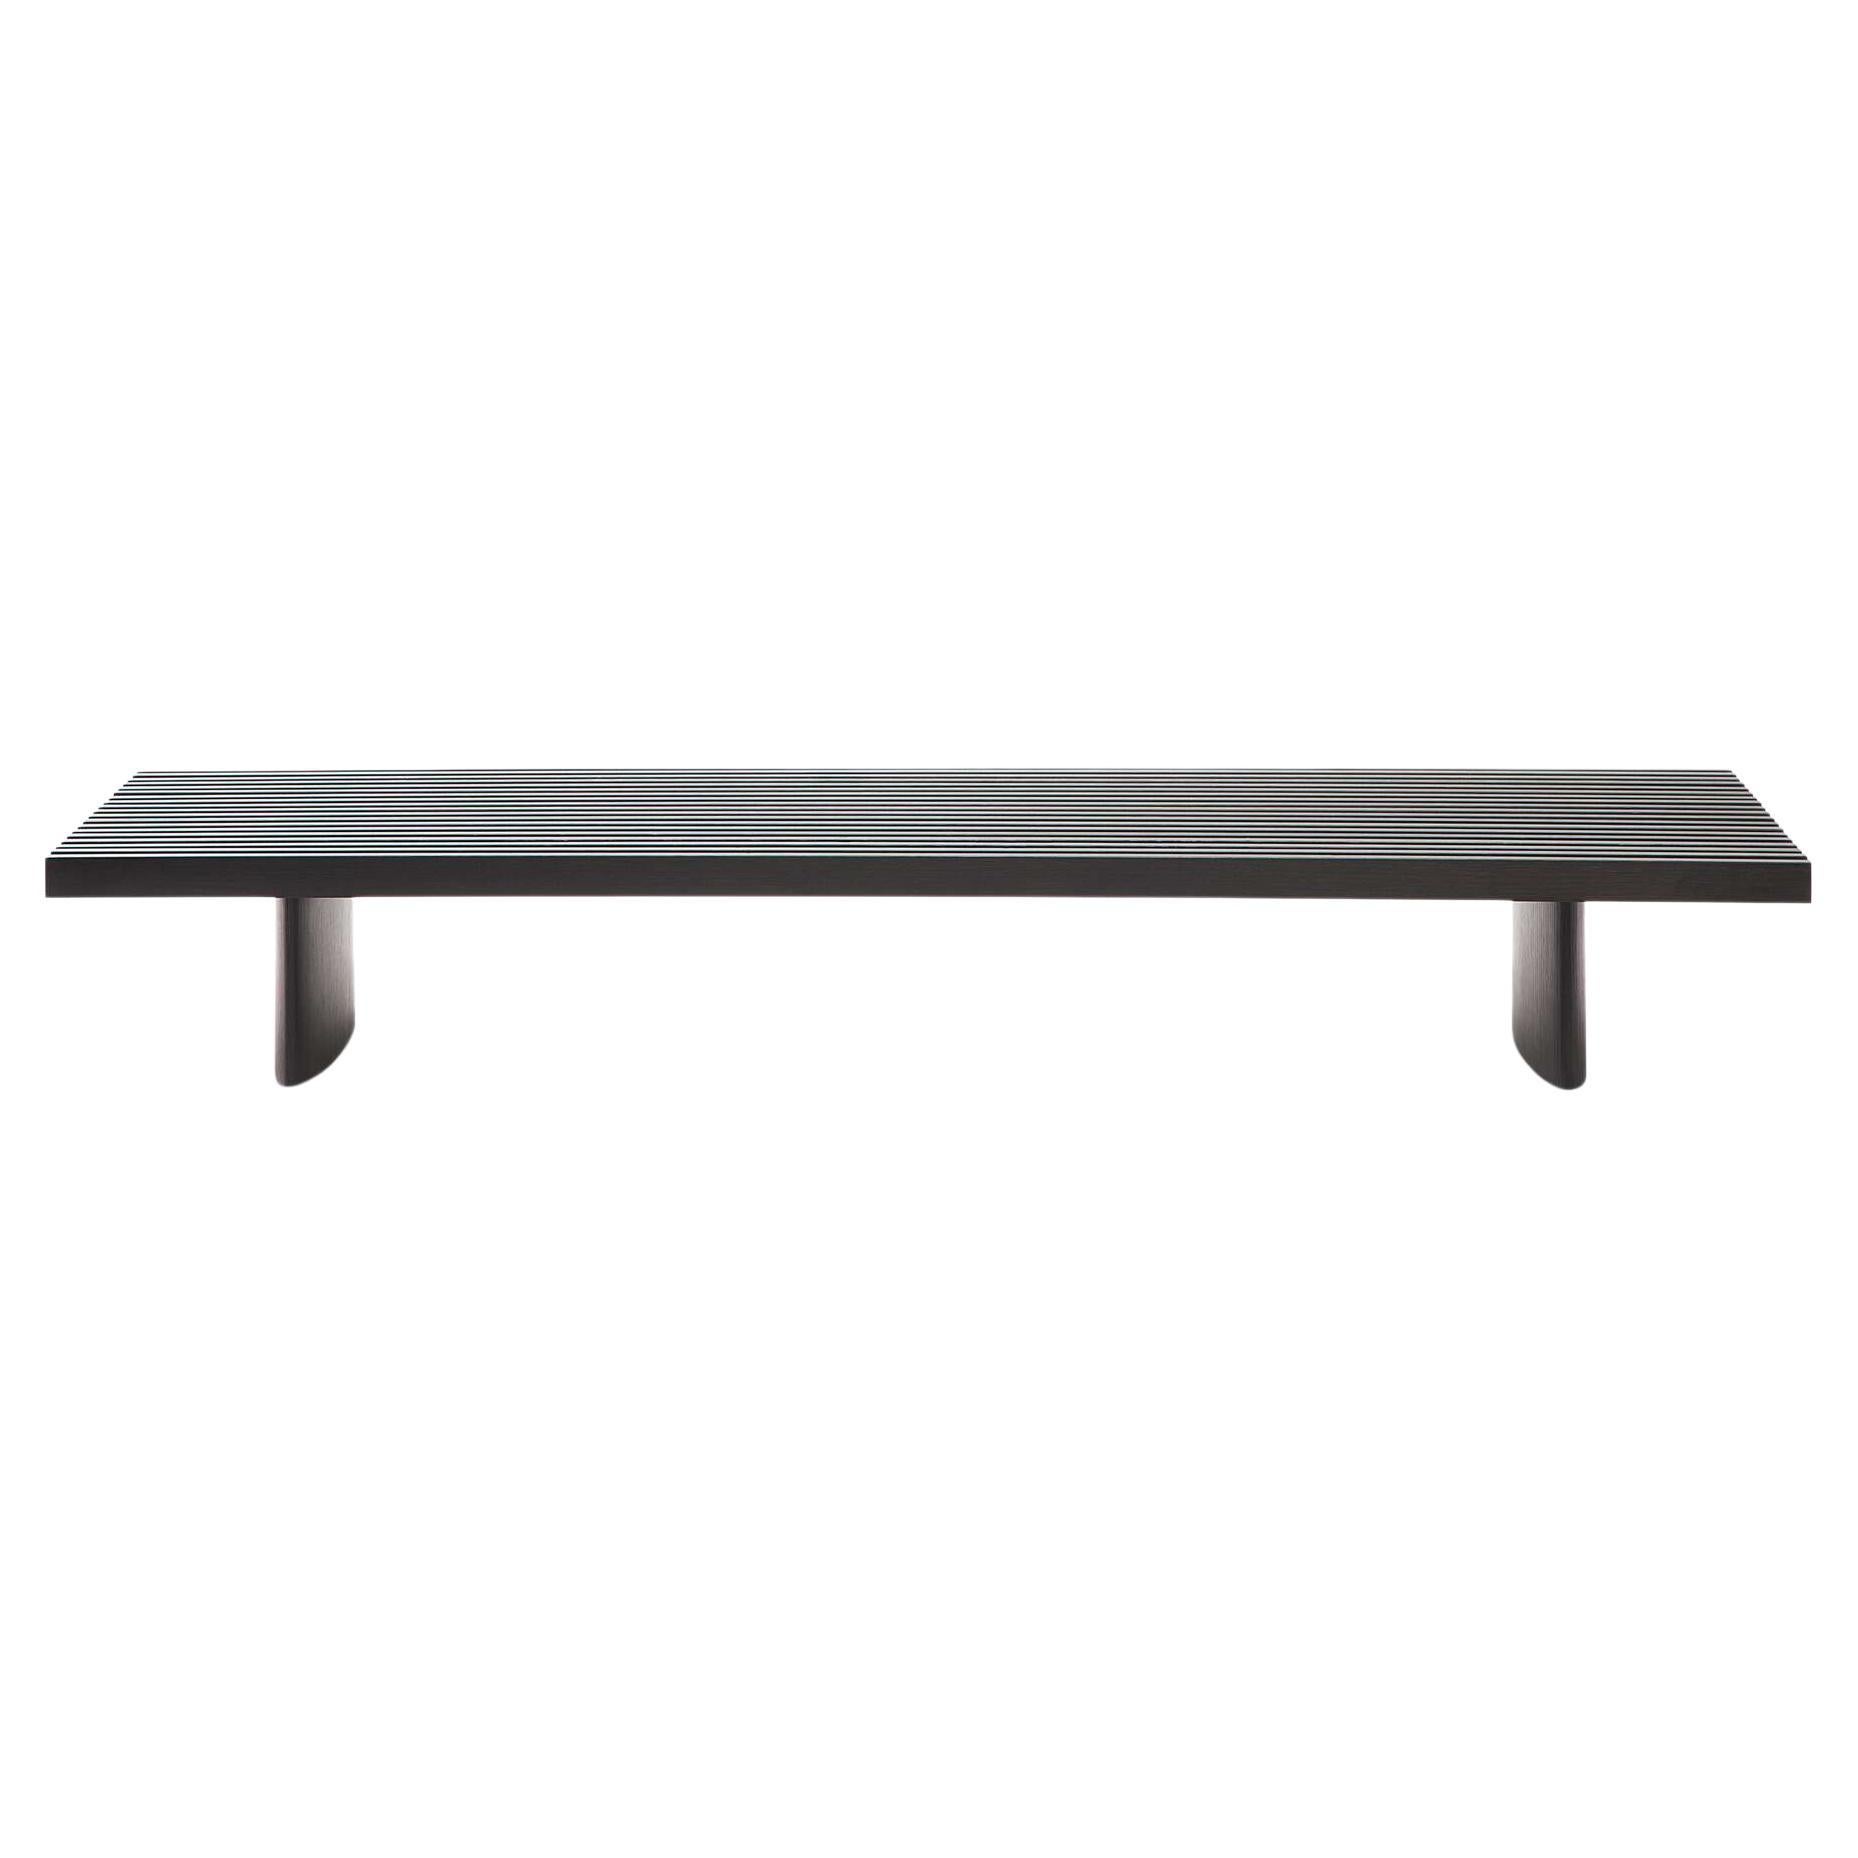 Charlotte Perriand Refolo Low Table, Bench or Sofa for Cassina, Italy - new For Sale